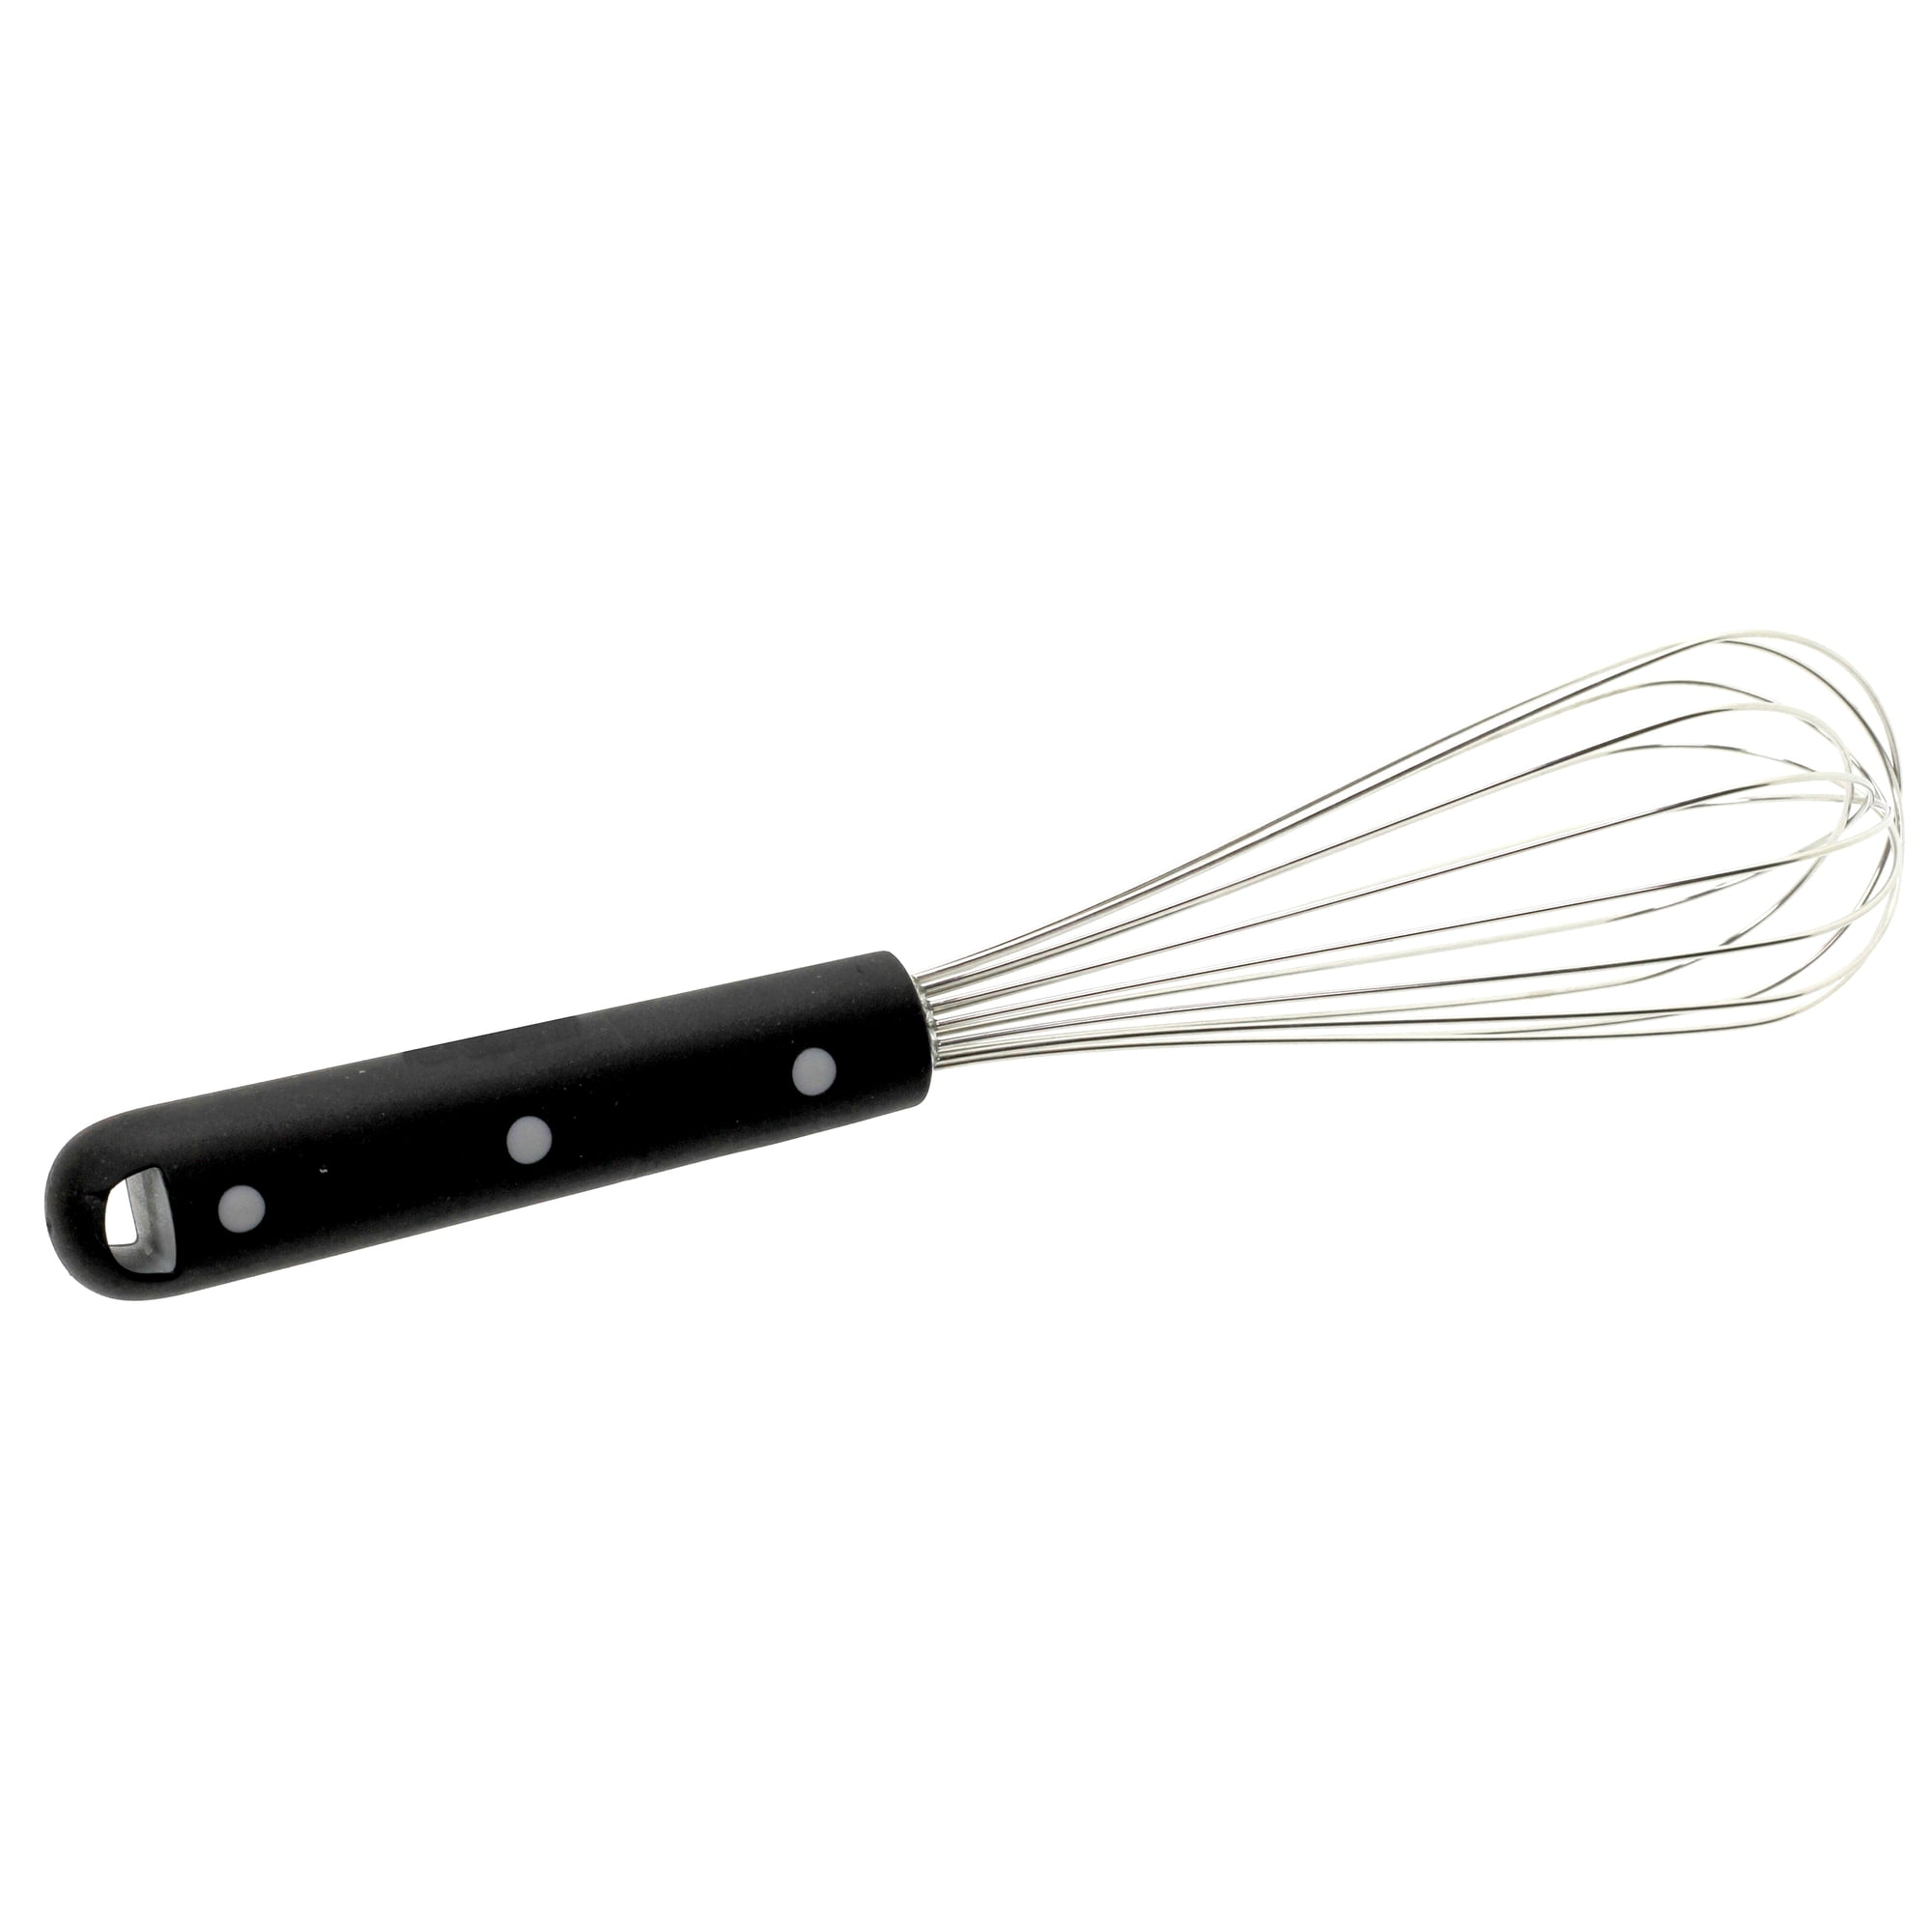 Material | The Air Whisk - Stainless Steel Whisk - Egg Beater - Cooking Utensils